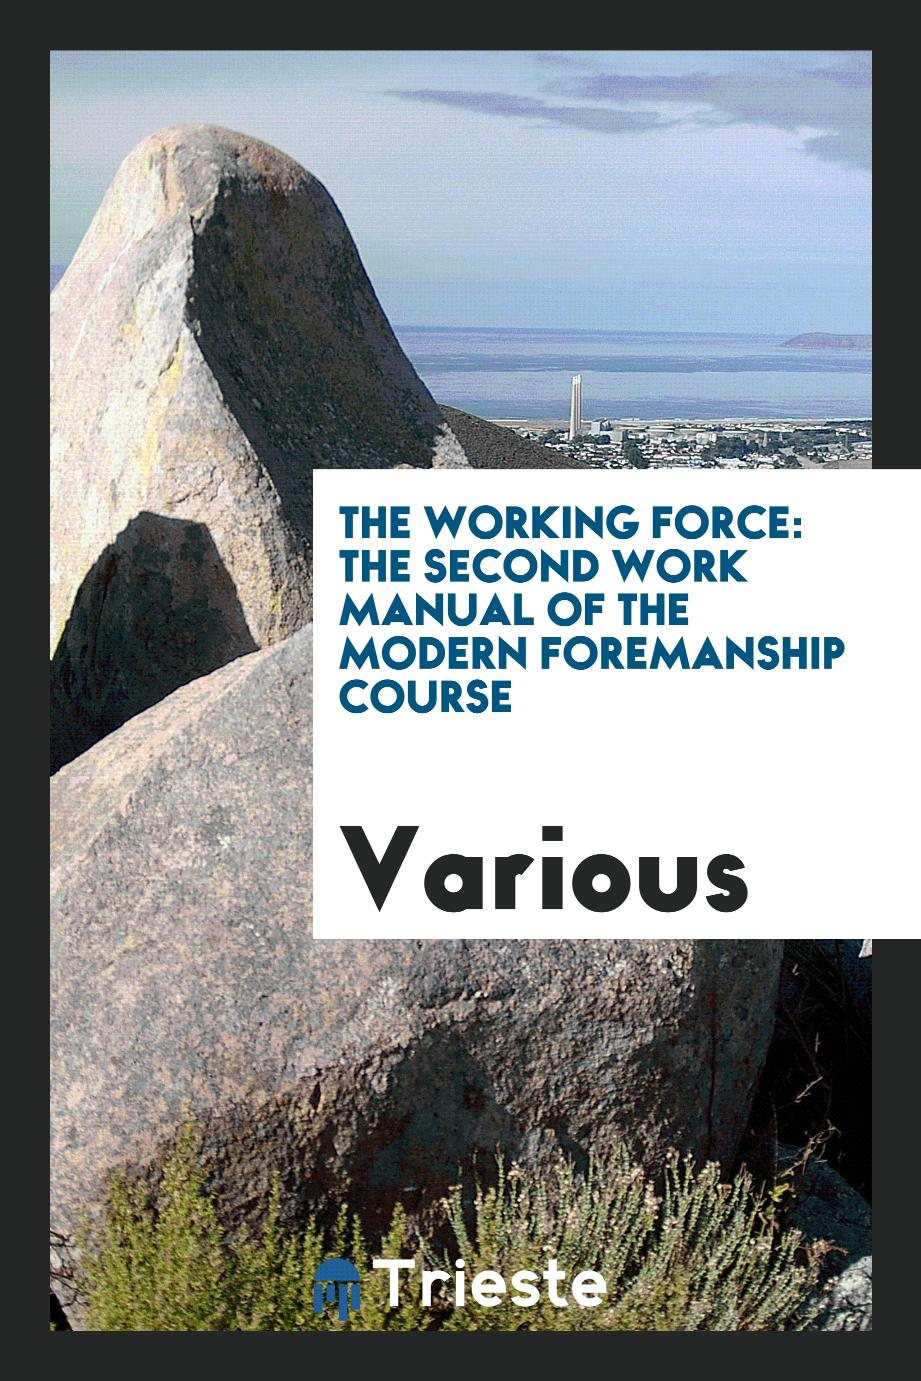 The Working Force: The Second Work Manual of the Modern Foremanship Course